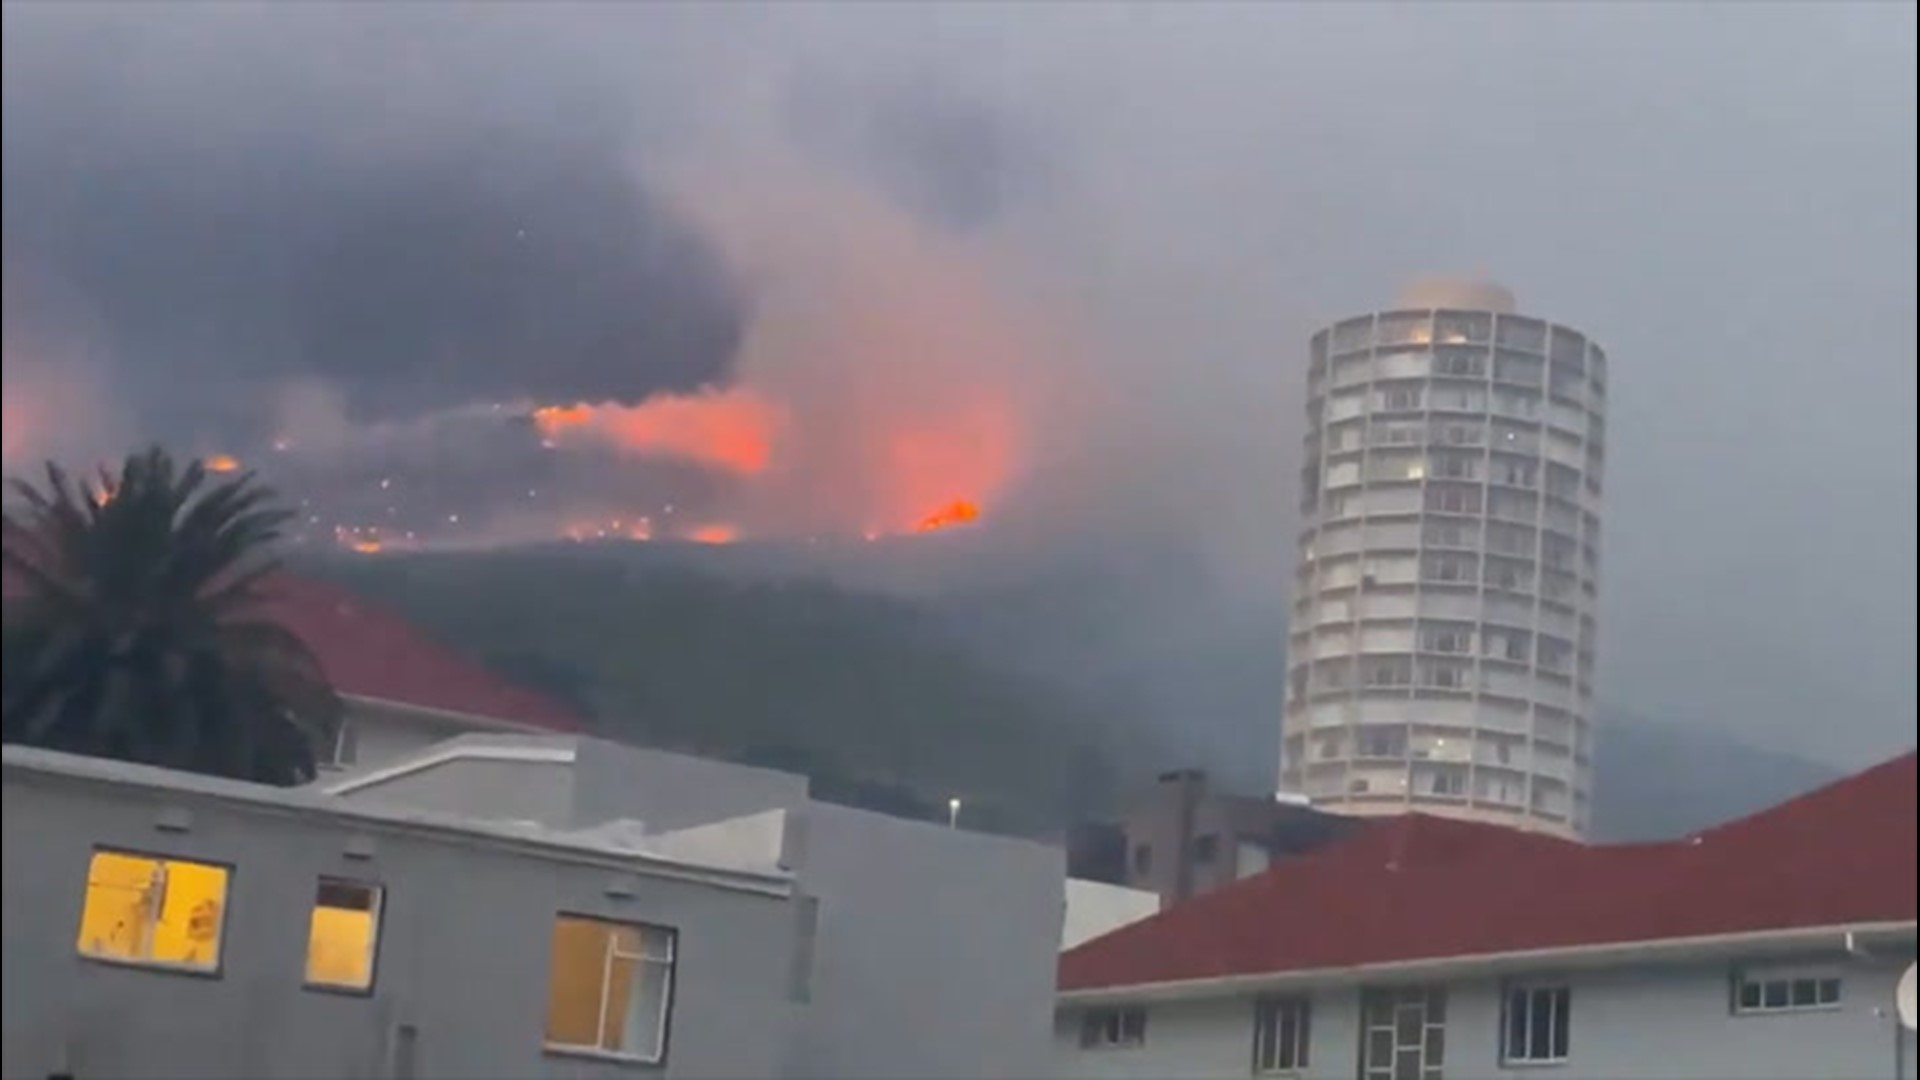 A fire that broke out on Sunday morning in the foothills of South Africa's iconic Table Mountain continued burning on Monday, destroying buildings and forcing evacuations as firefighters struggled against strong winds.